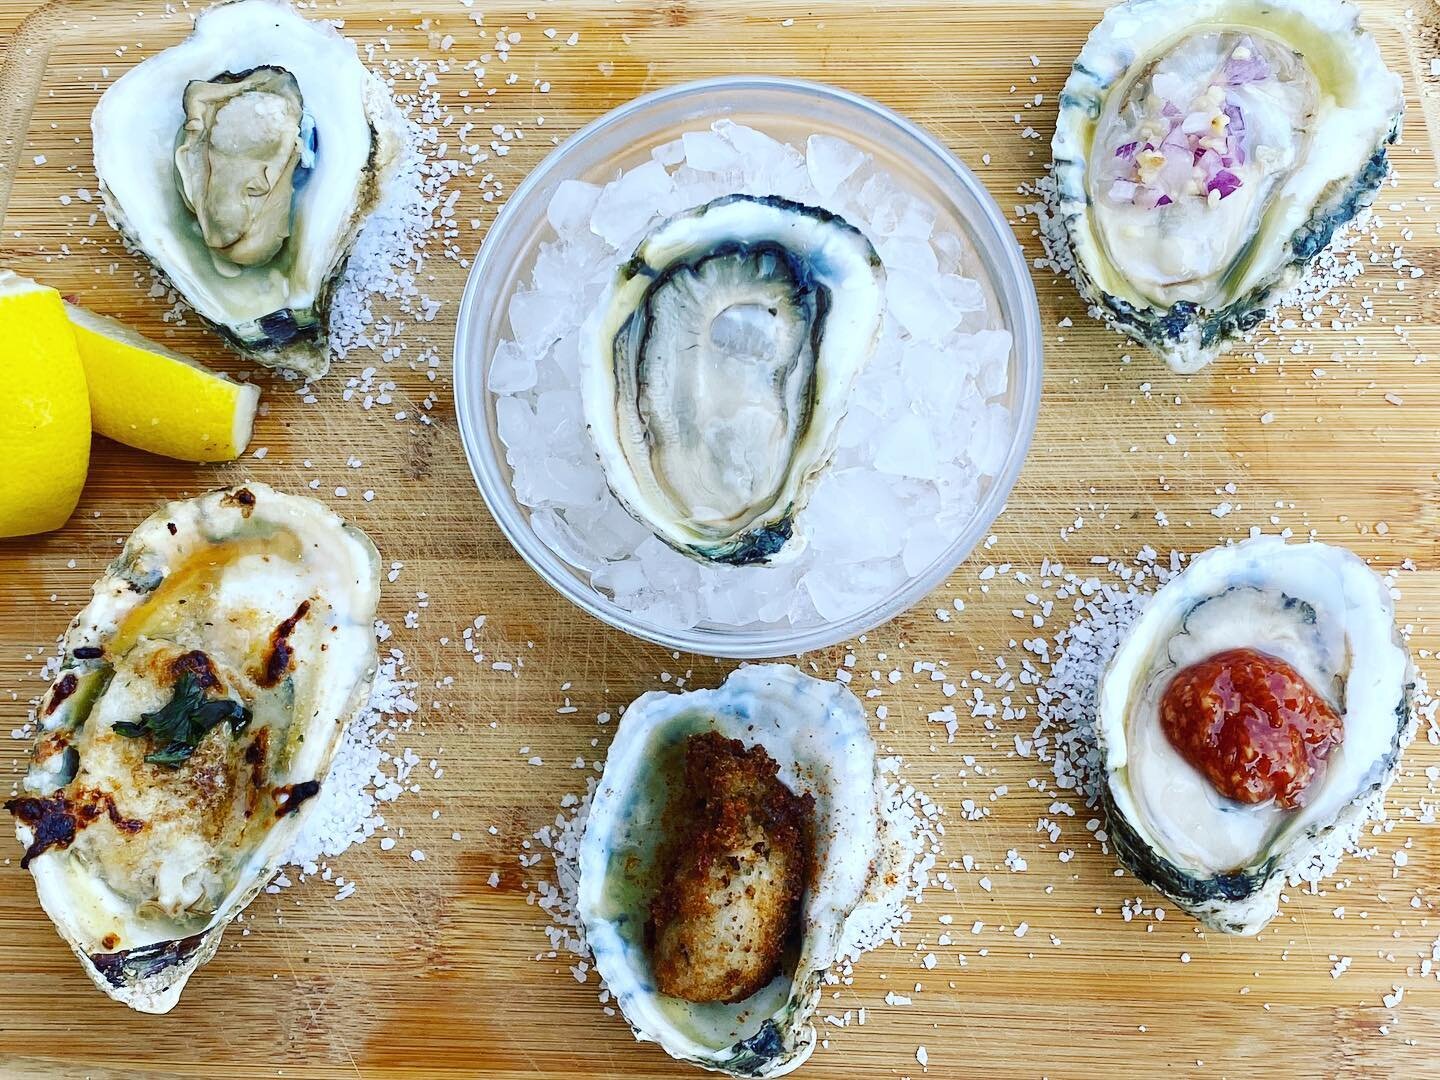 How do you take your oysters?? Dressed, cooked, our &ldquo;nekkid&rdquo; (as we say on the Eastern Shore😊). With so many combinations there&rsquo;s an oyster style for everyone, and take our word for it, there&rsquo;s no such thing as too many oyste